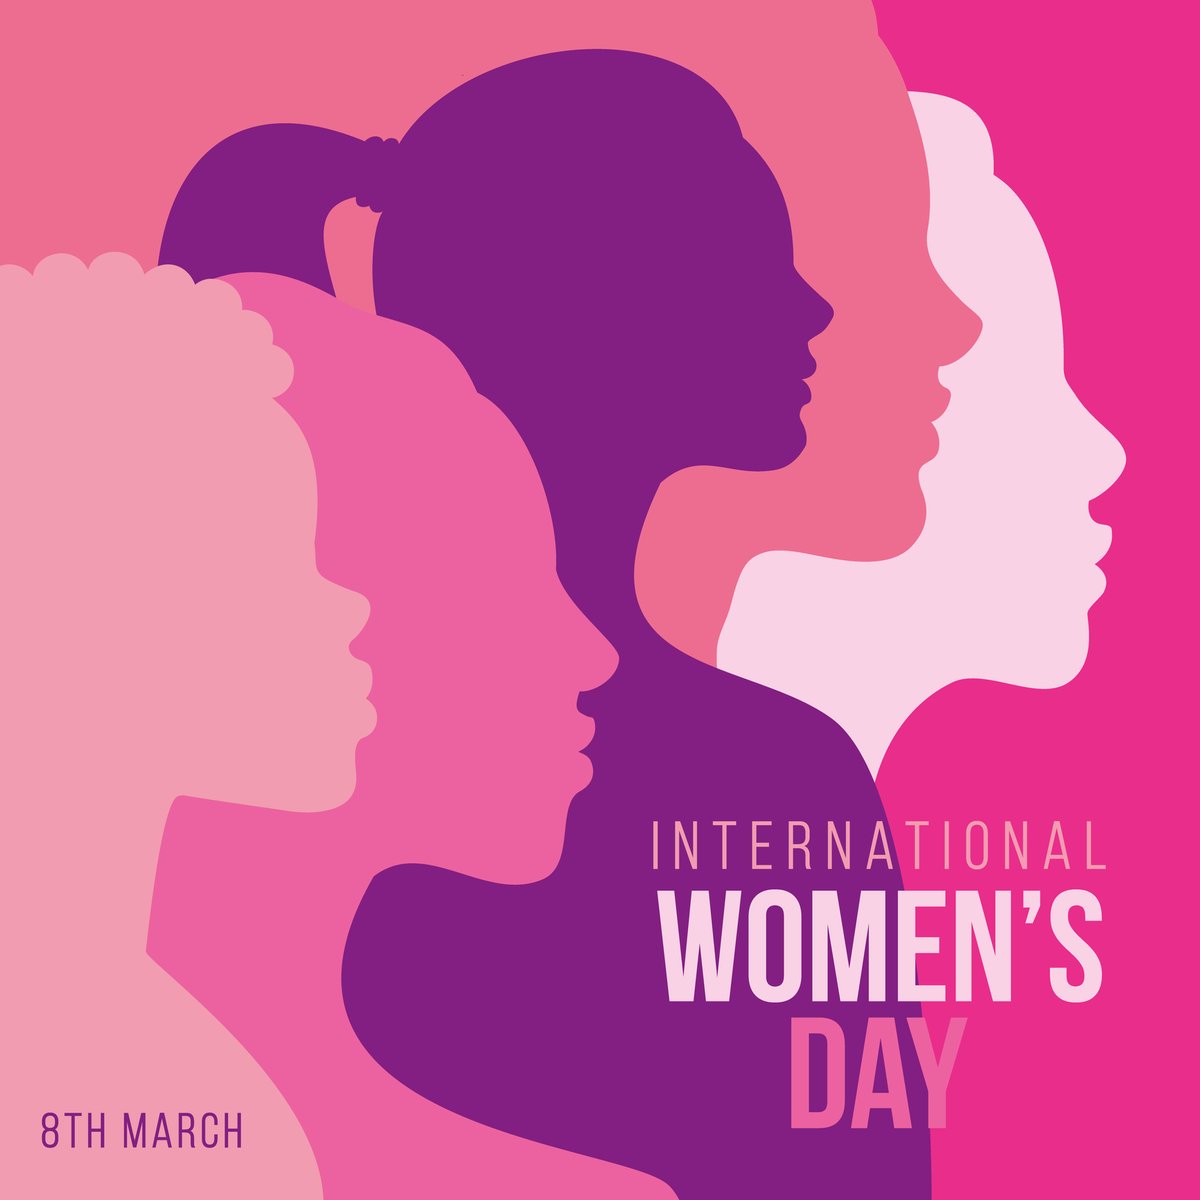 Happy International Women’s Day! Celebrating all the women in our lives that inspire us everyday to be our best 💐 #internationalwomensday2024 #iwd #iwd2024 #womenincancer #womeninmedicine